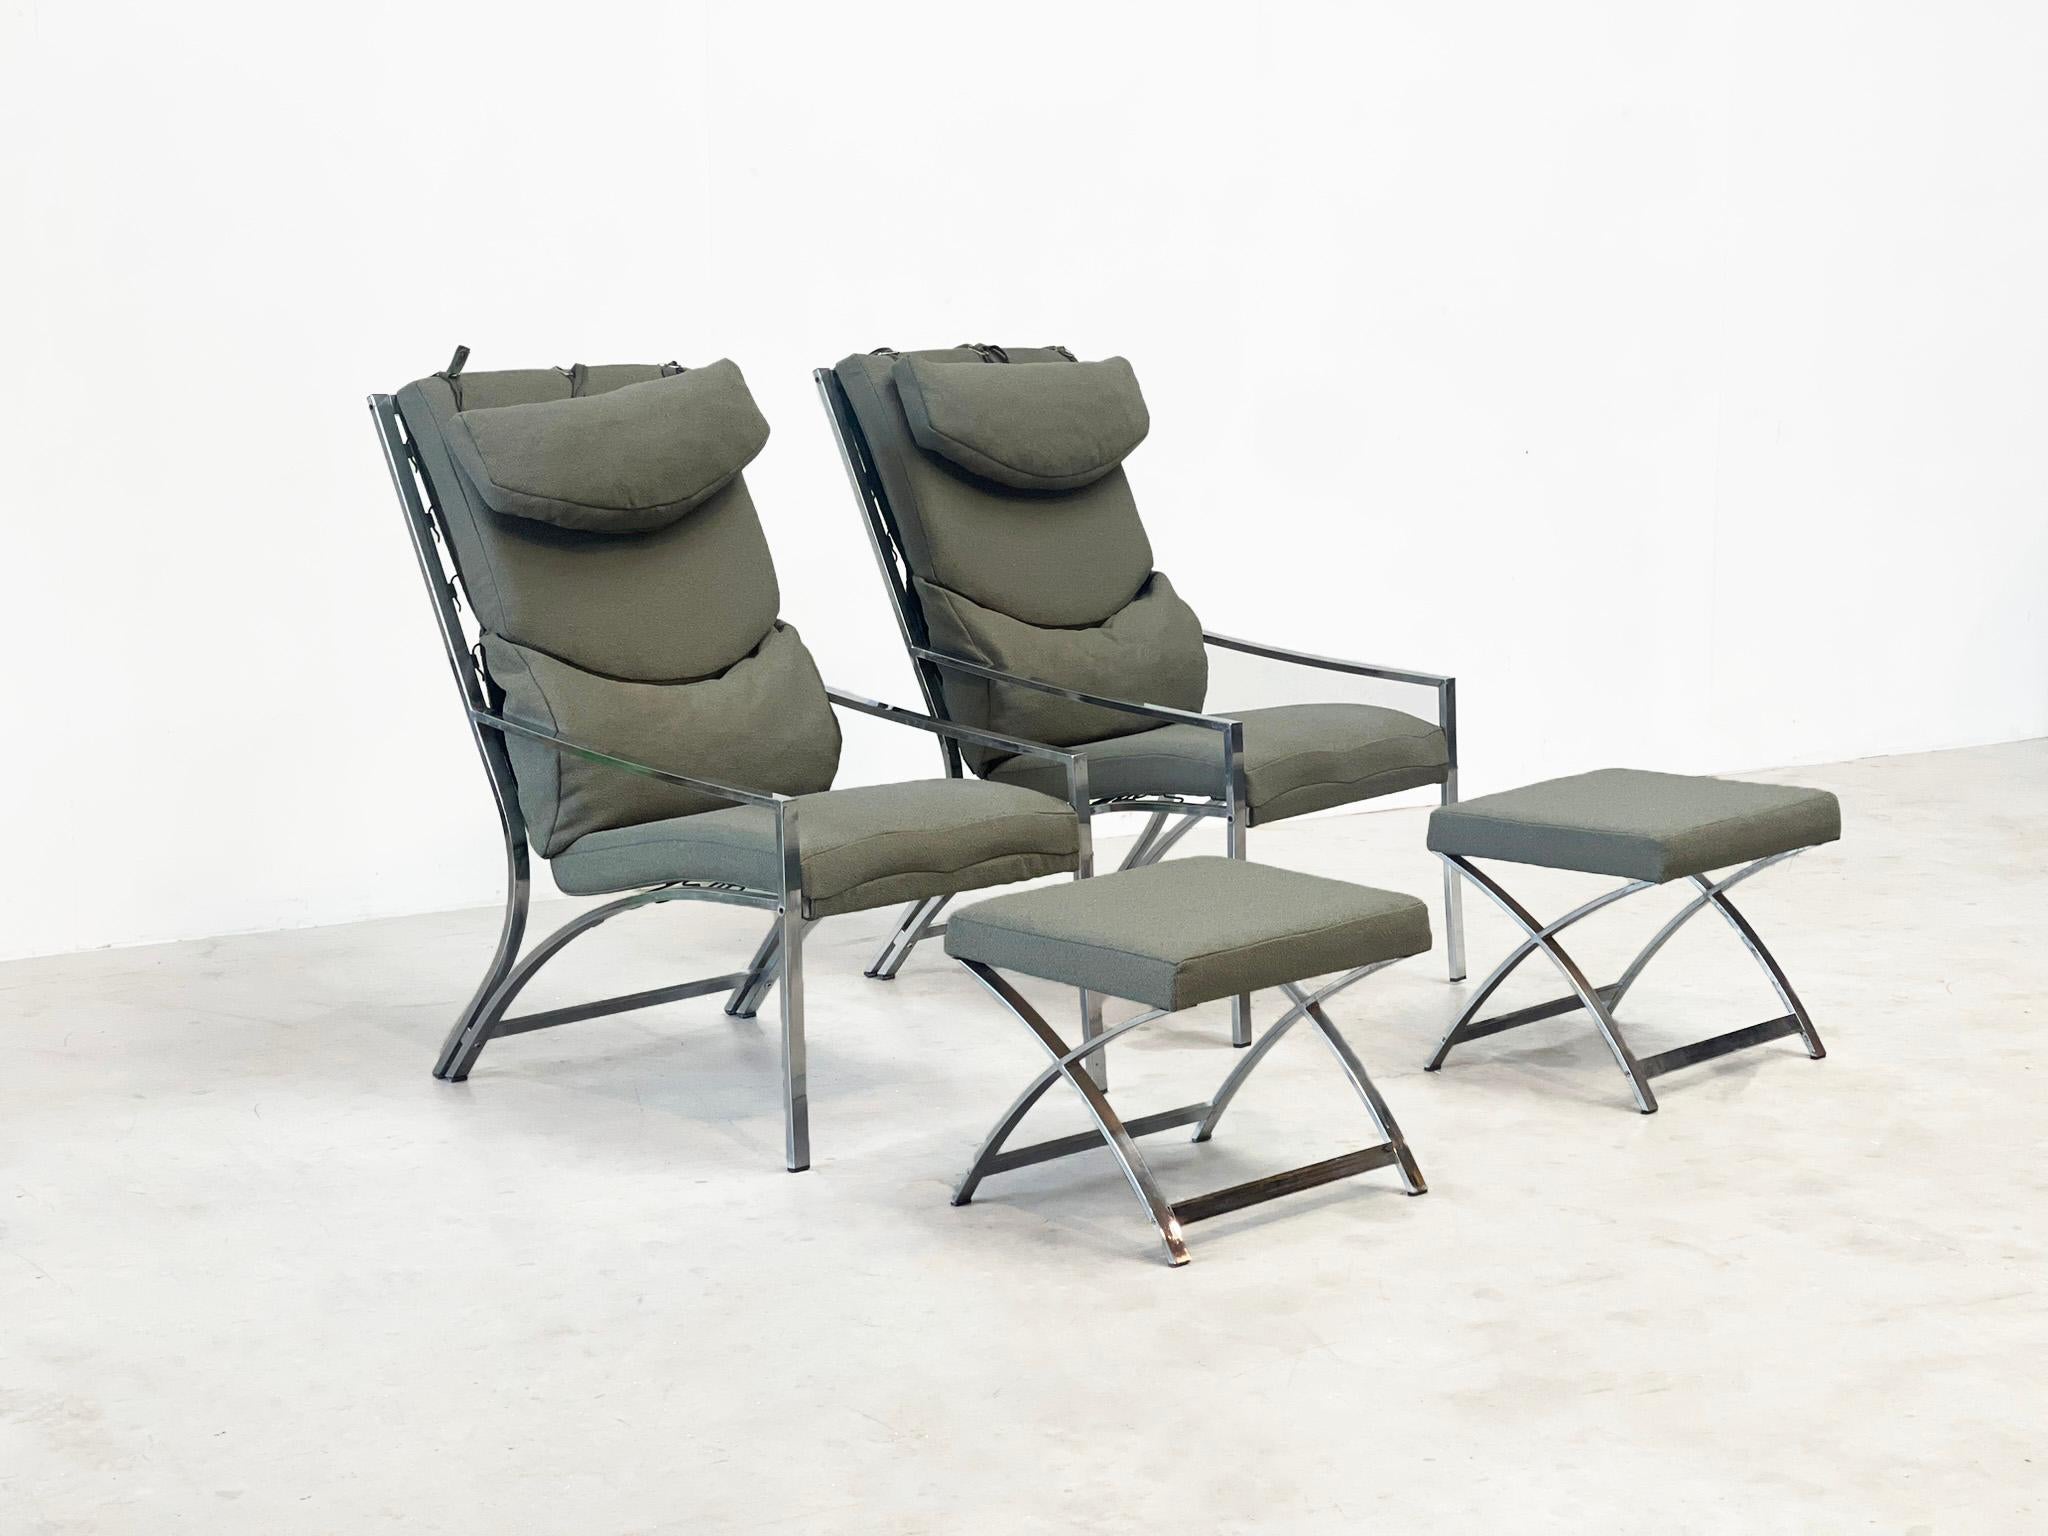 
Unfortunately, we cannot say with 100% certainty where these lounge chairs came from. They are elegant, very well made and truly a feat of craftsmanship. These luxury lounge chairs were already very expensieve in the 70's. They have a beautiful